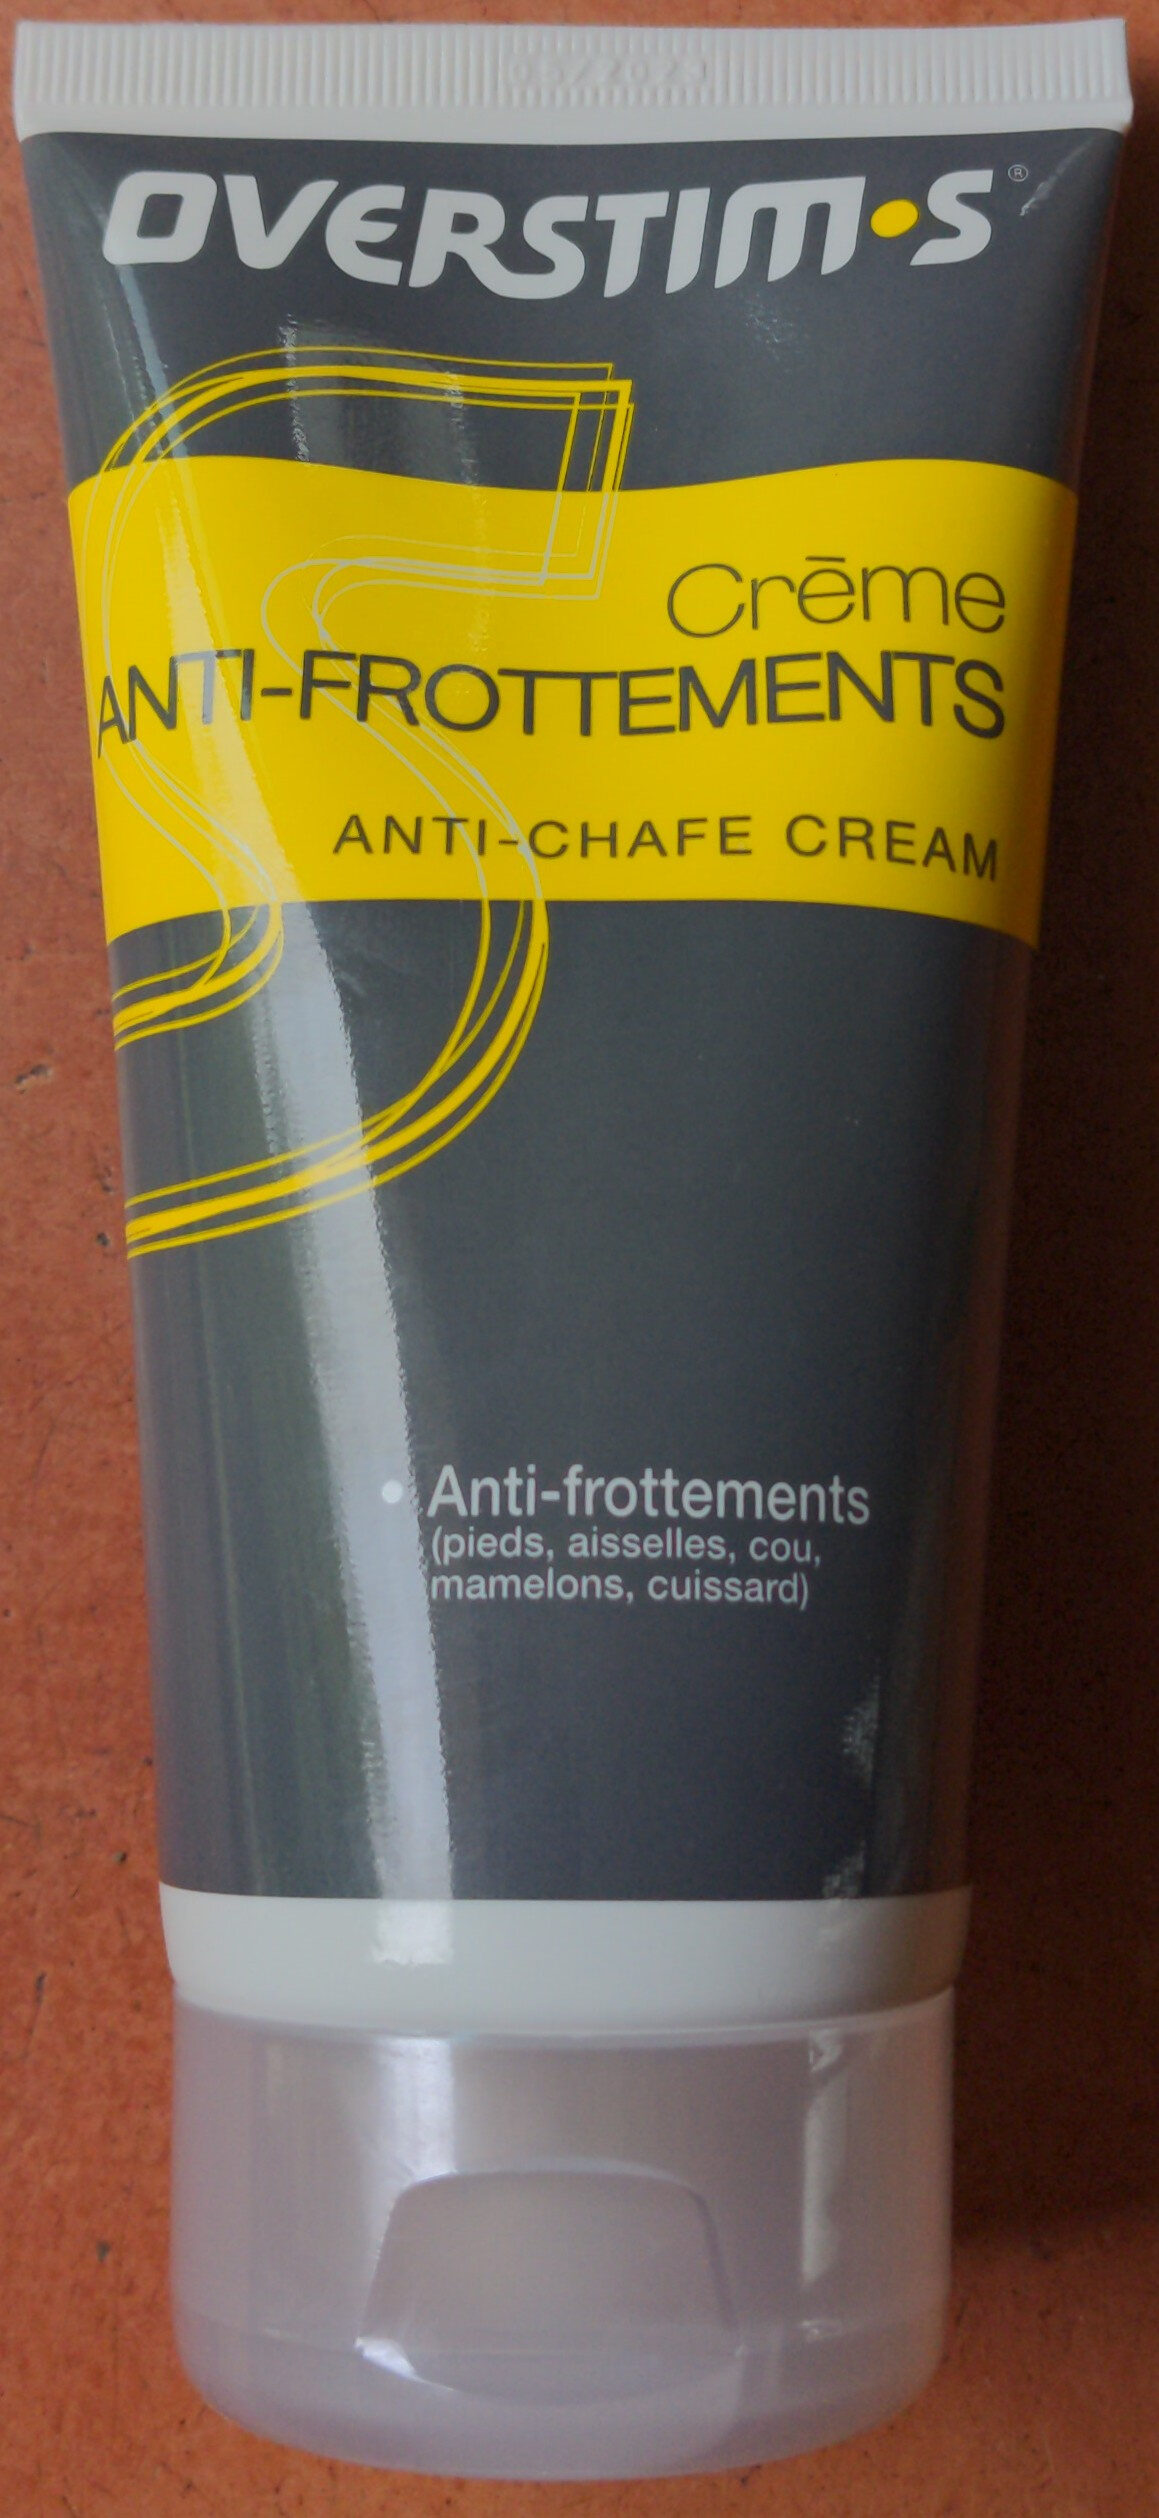 Crème anti-frottements - 製品 - fr